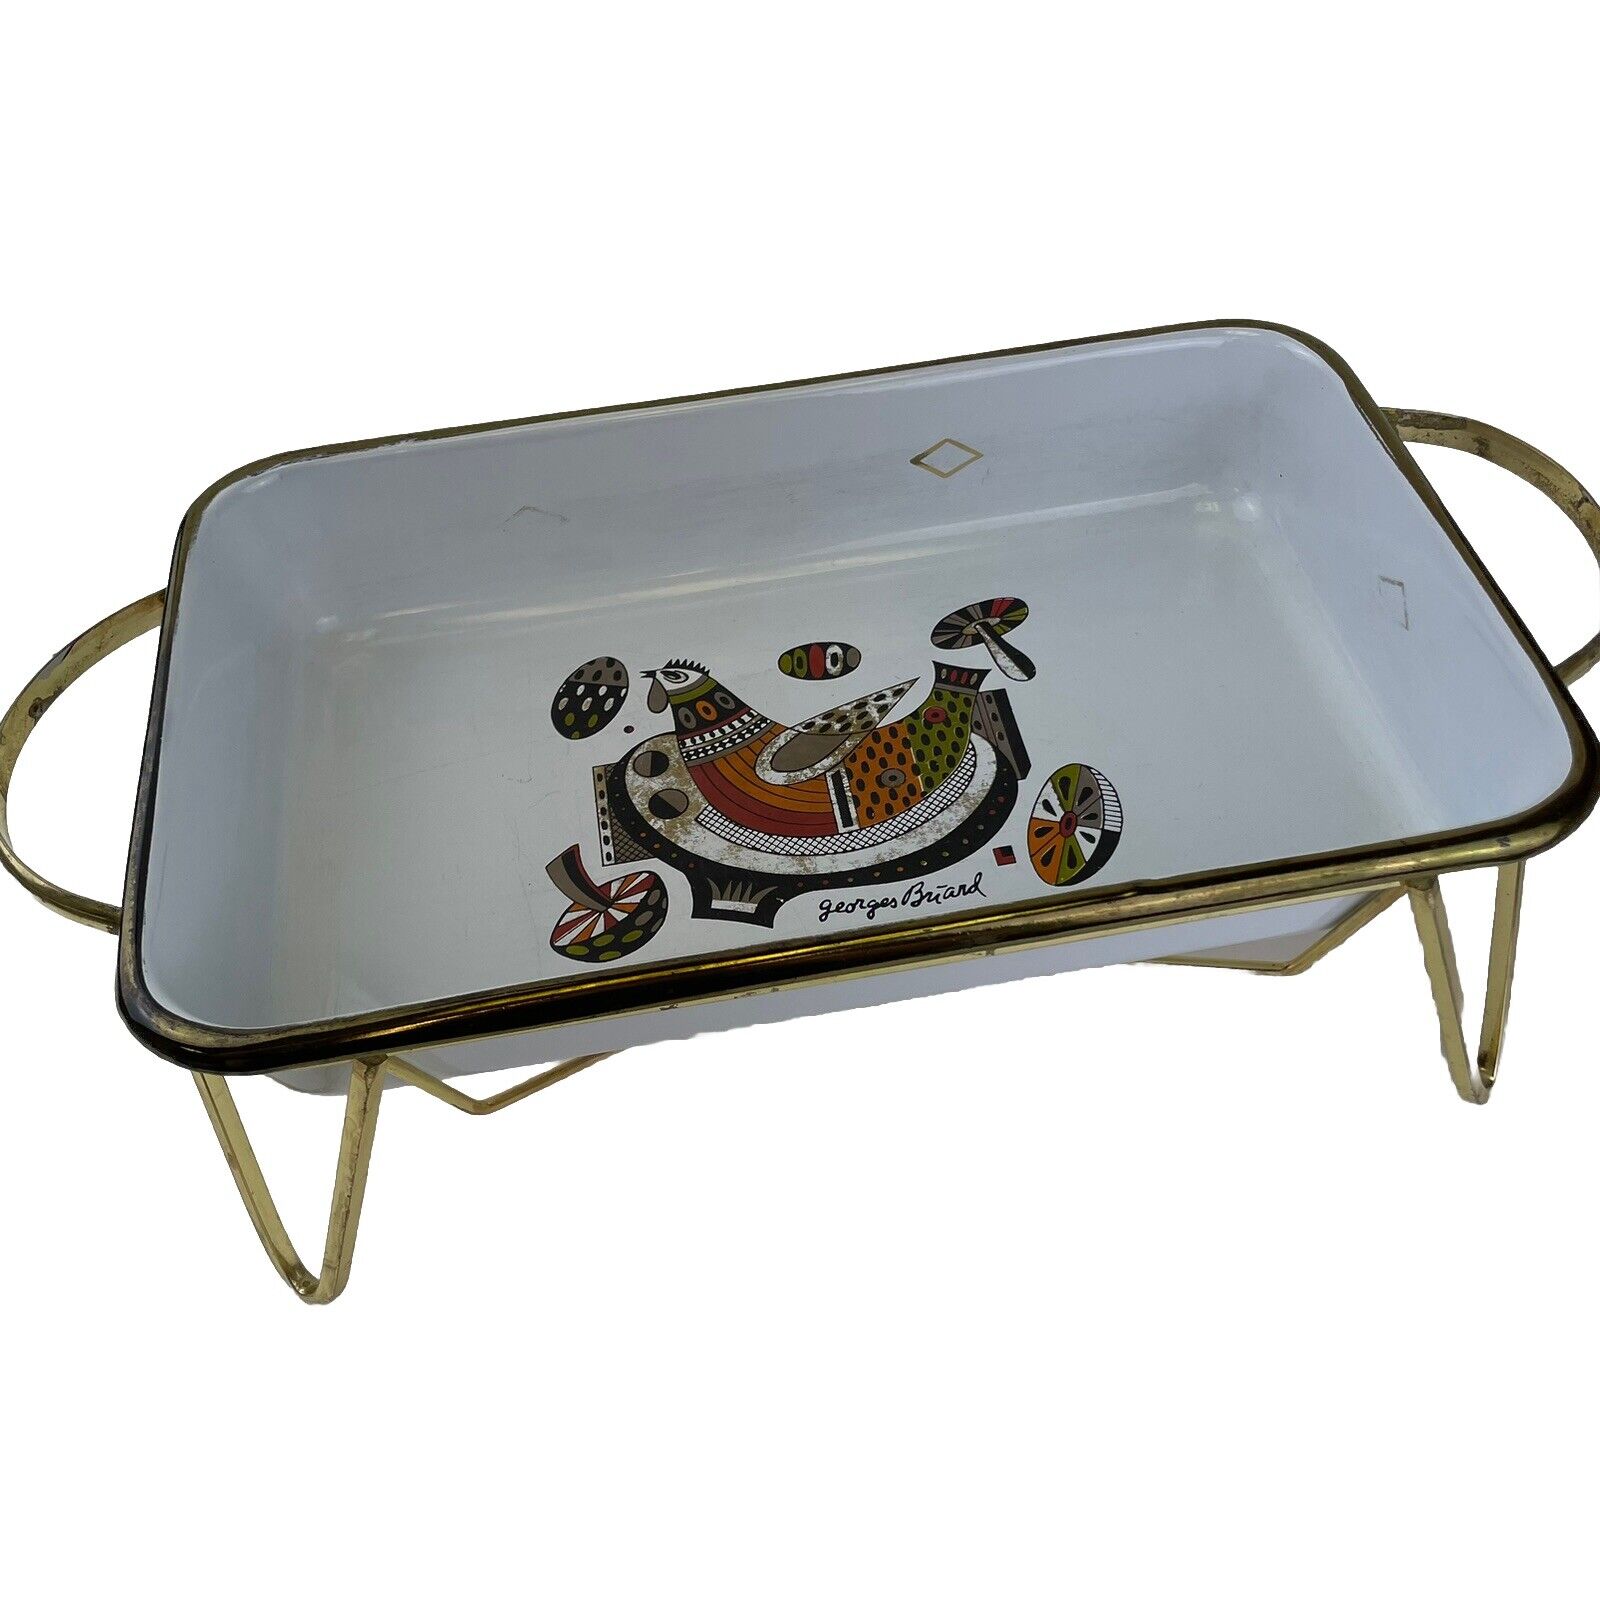 Vintage Georges Briard Enamel Casserole Dish Chafing Stand Rooster Mushroom MCM